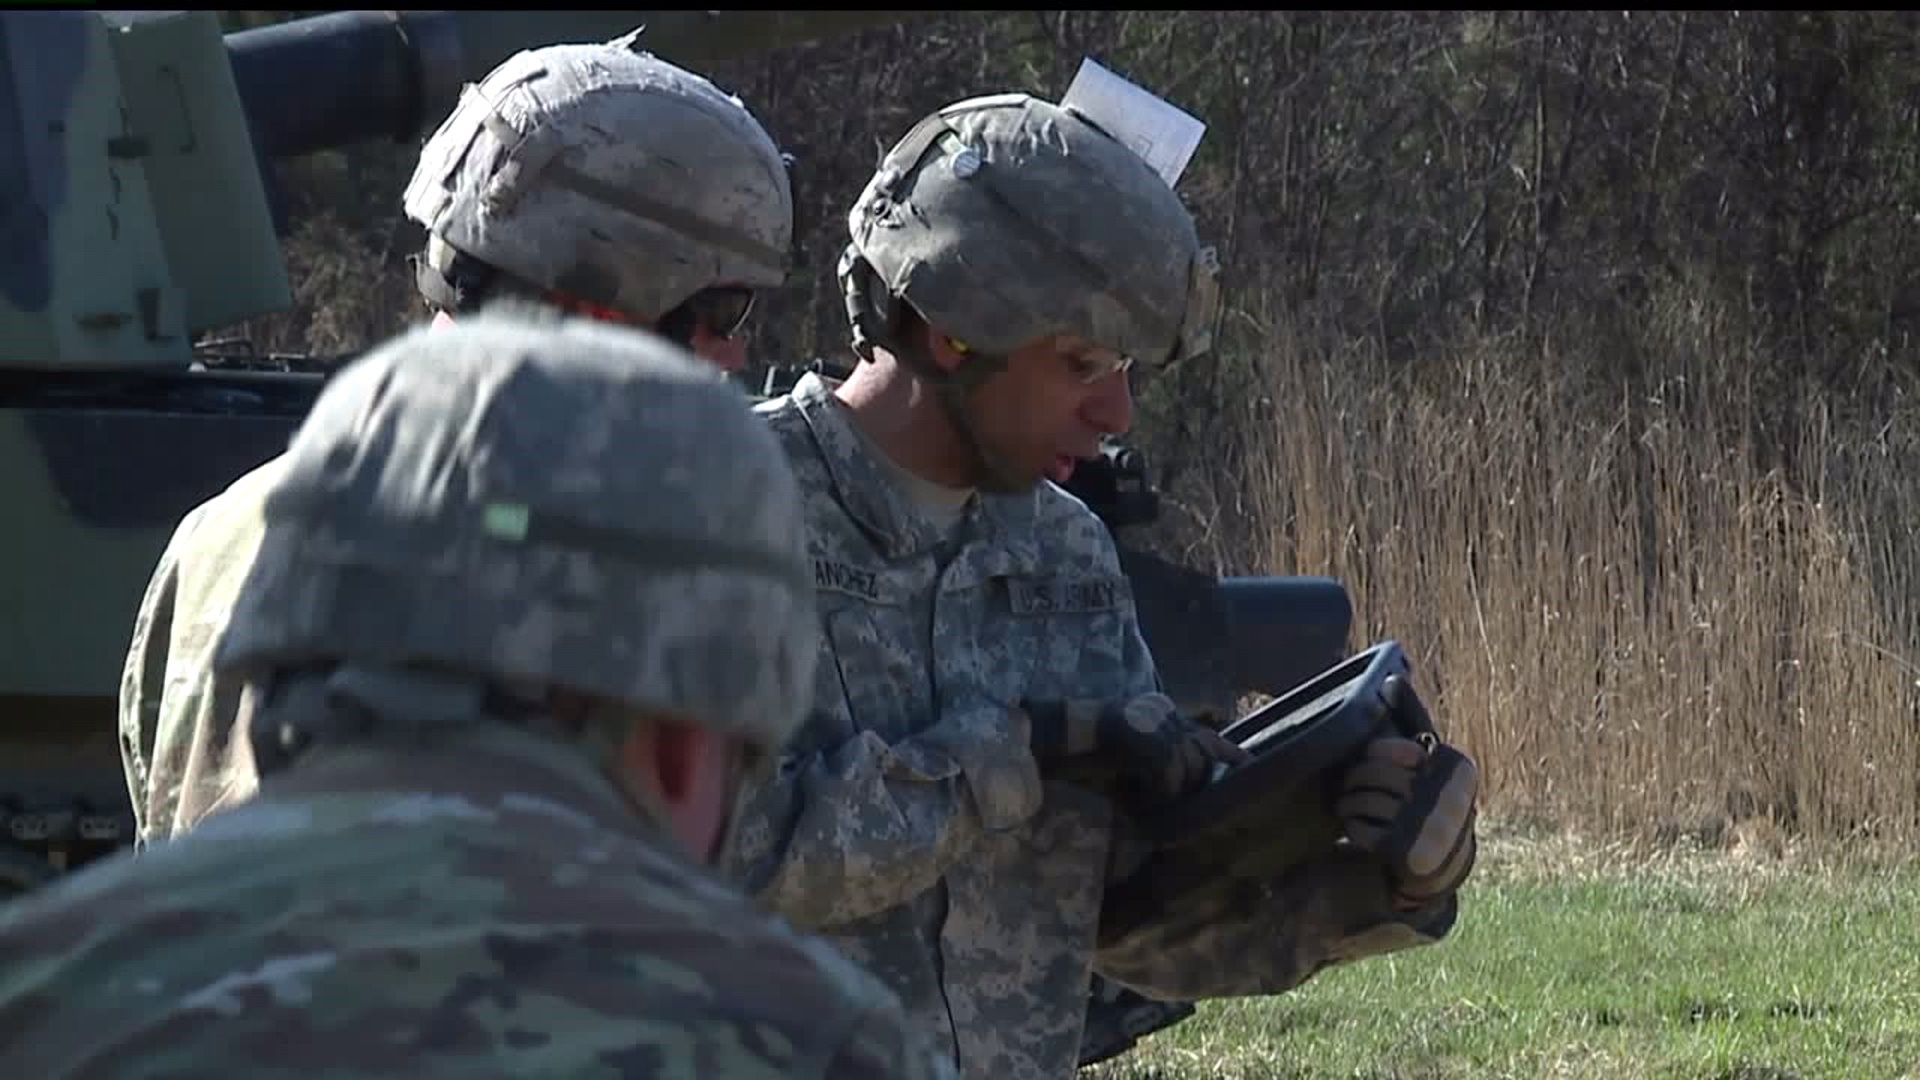 Behind the scenes: Live fire training at Fort Indiantown Gap